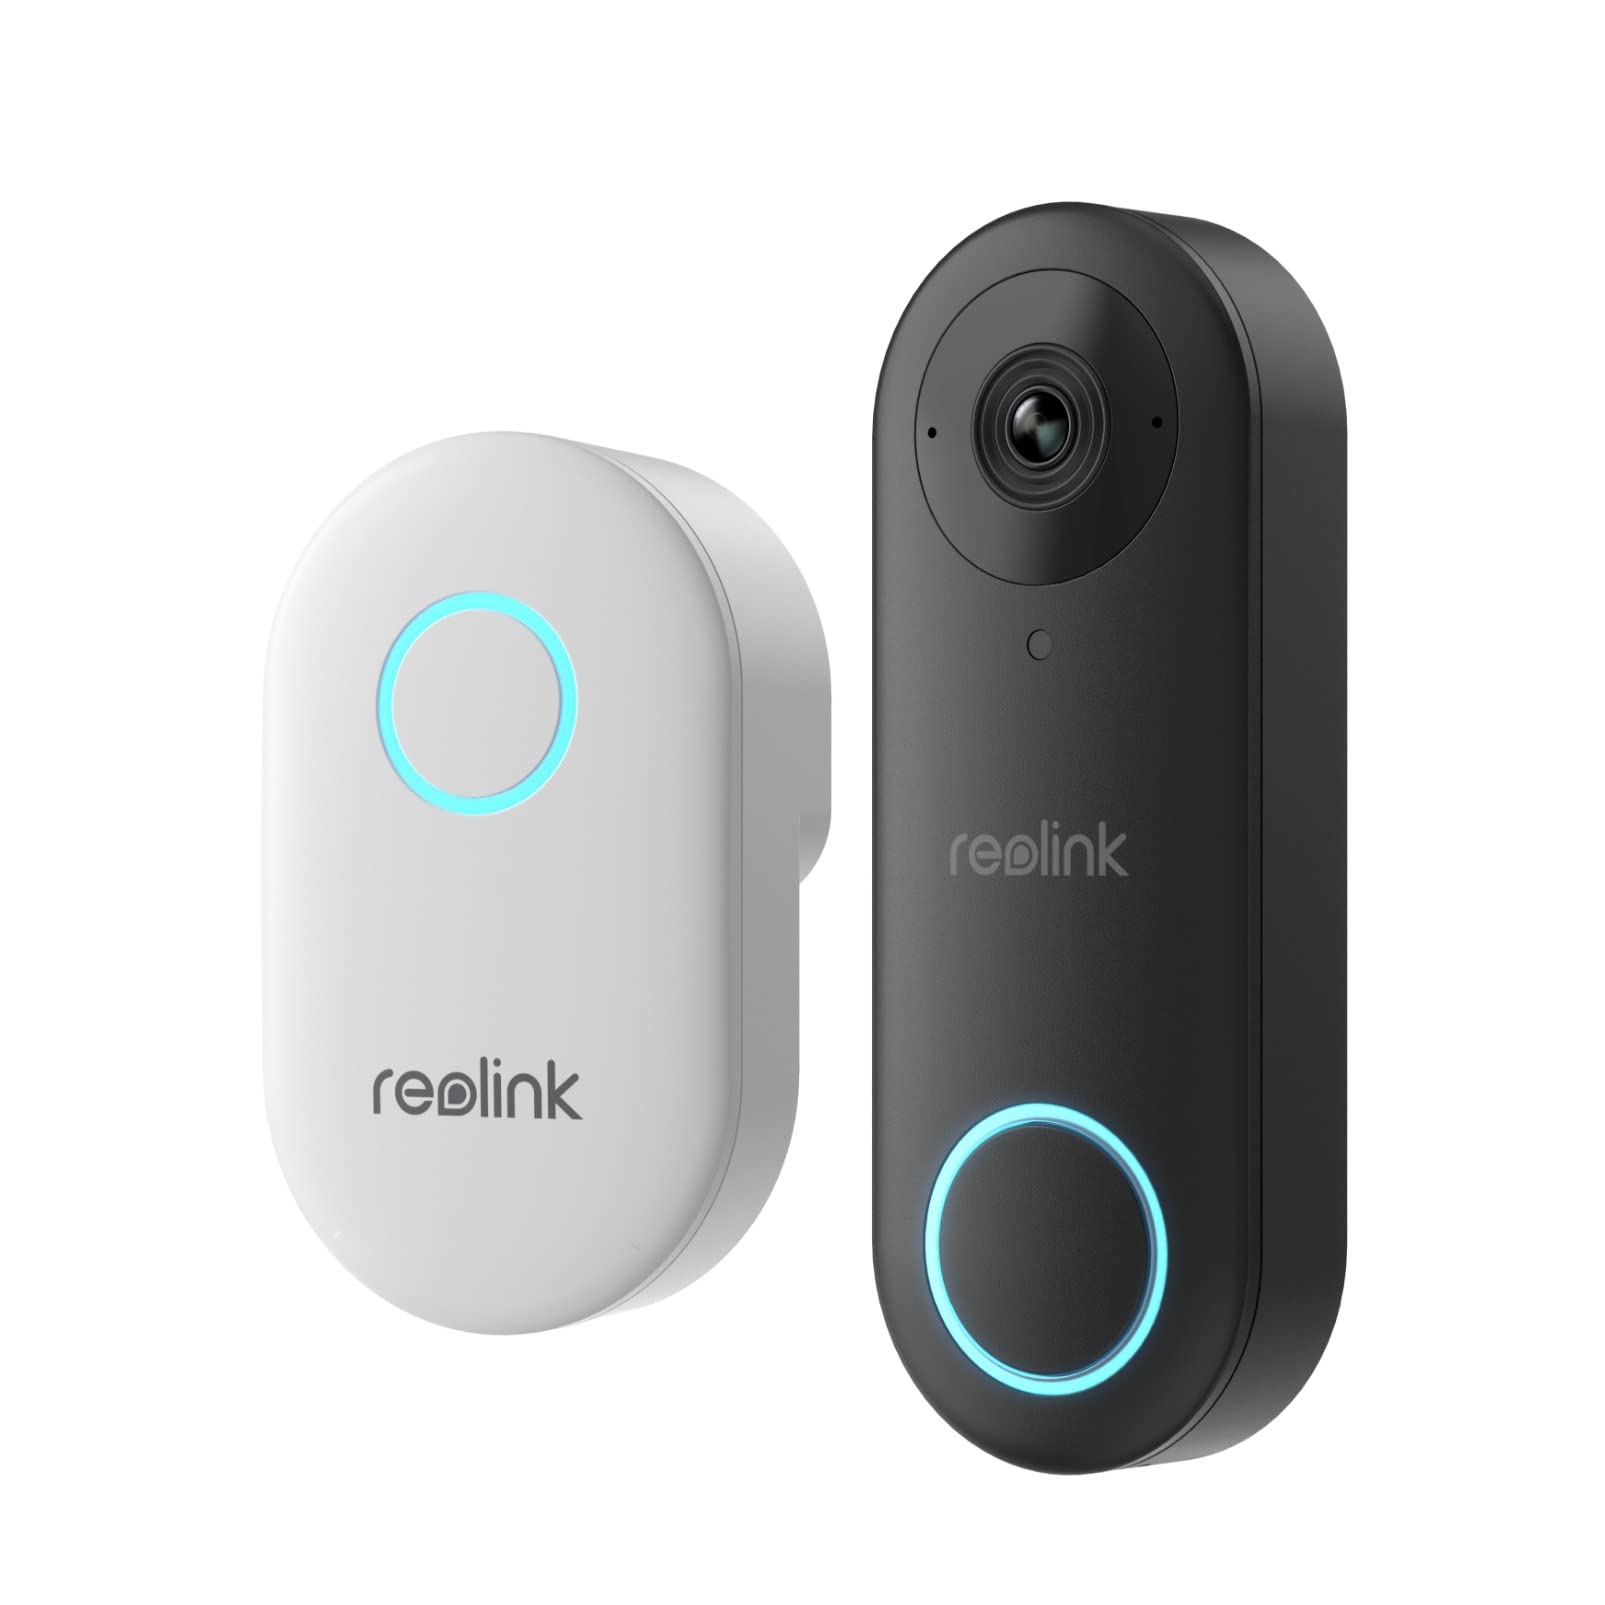 Reolink Doorbell WiFi Camera - Wired 5MP Outdoor Video Doorbell, 5G Wifi Security Camera System, Smart Detection SD Card Storage No Subscription, Front Door Camera Home Security, Customized Chime Ring